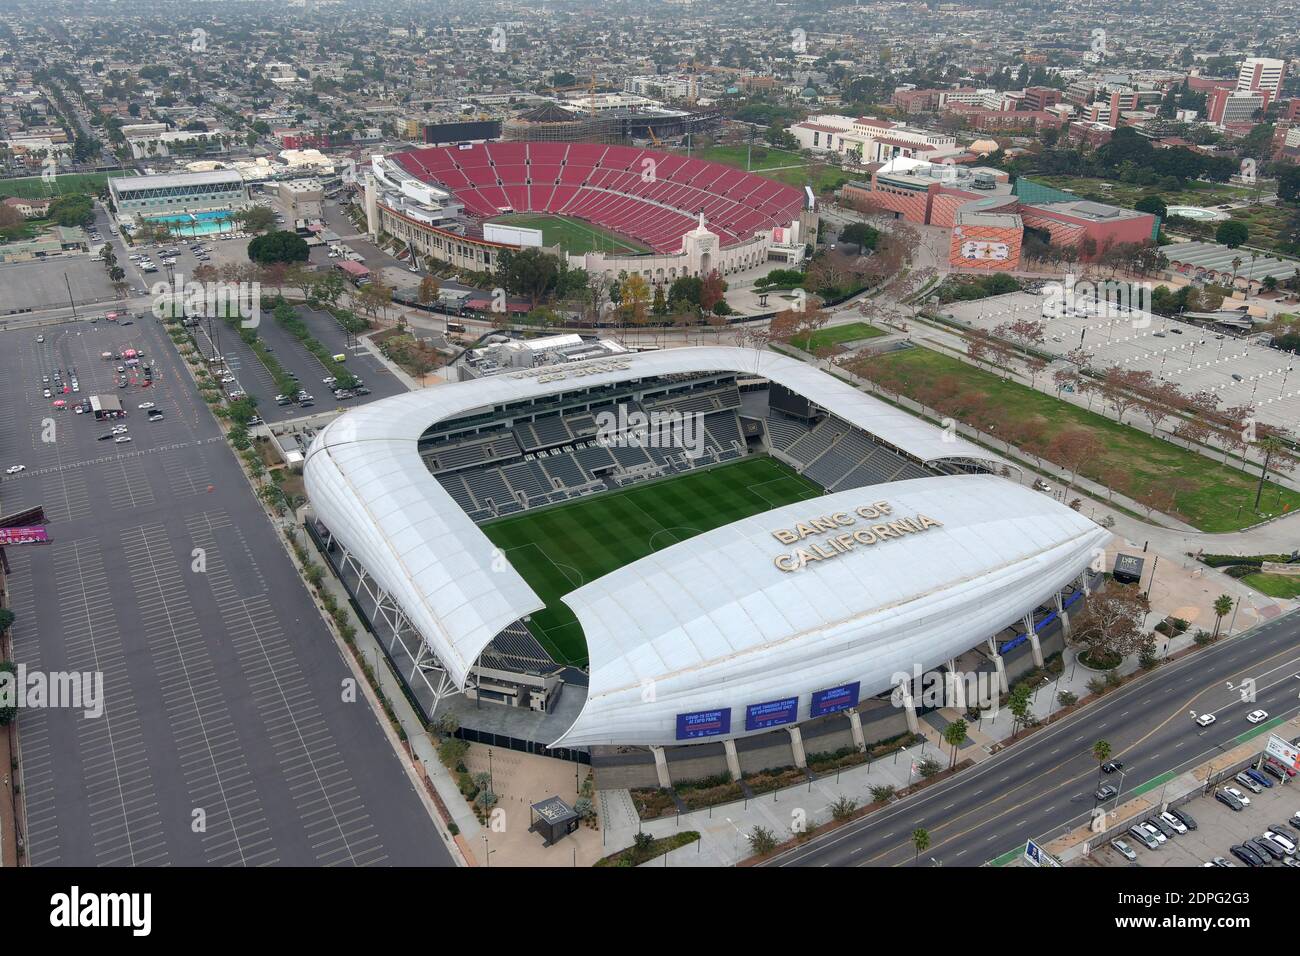 A general view of Banc of California Stadium and the Los Angeles Memorial Coliseum, Monday, Dec. 7, 2020, in Los Angeles. Stock Photo